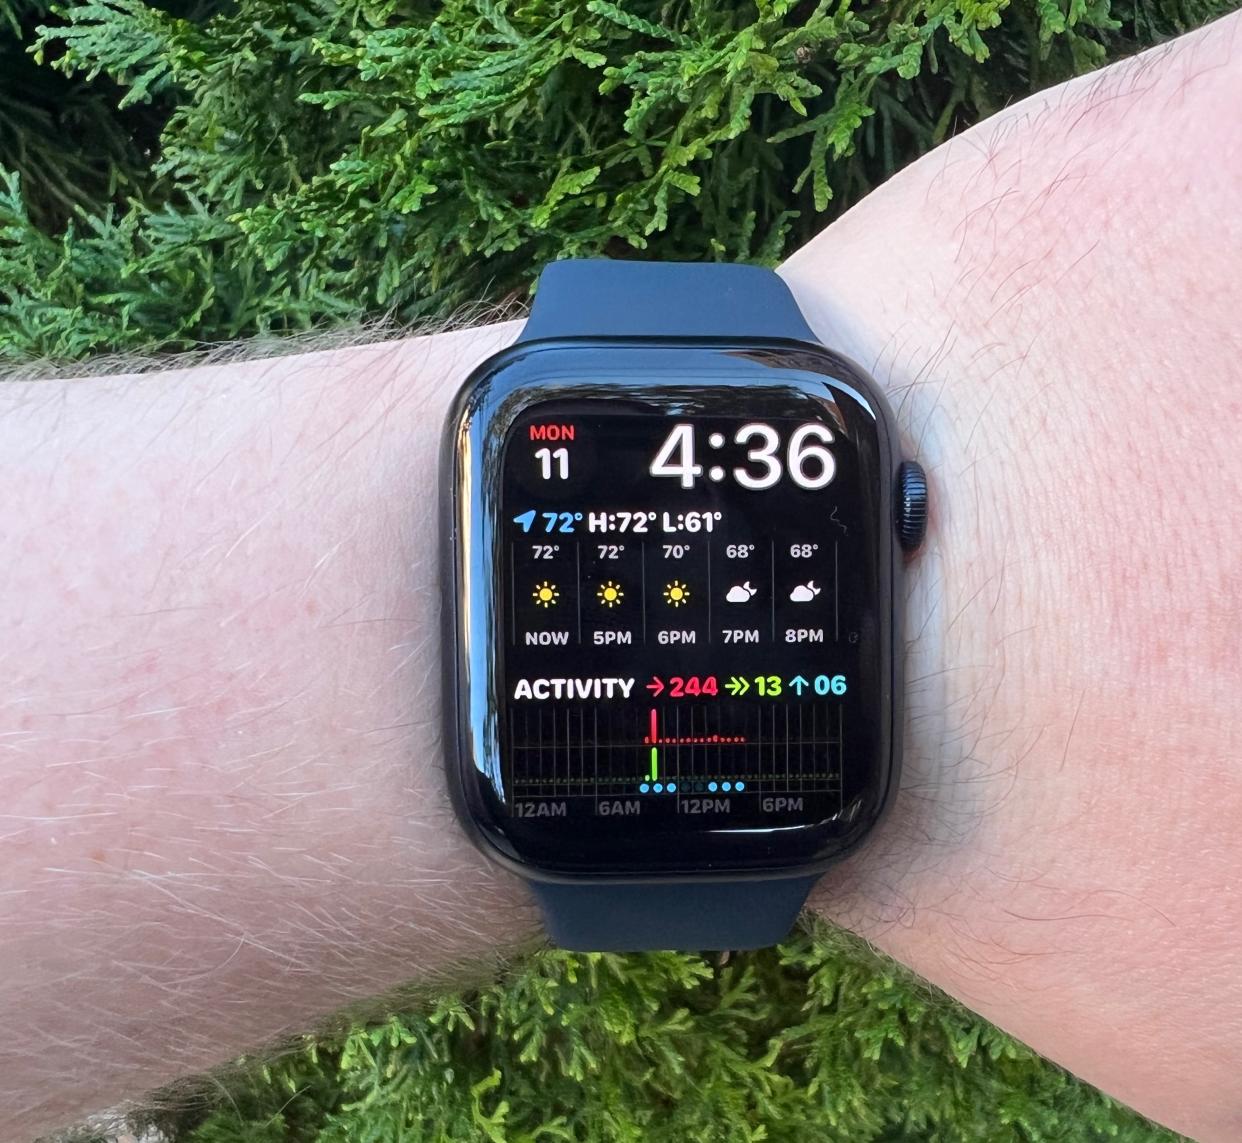 The Apple Watch Series 7 gets two new faces that take advantage of its larger display. (Image: Howley)